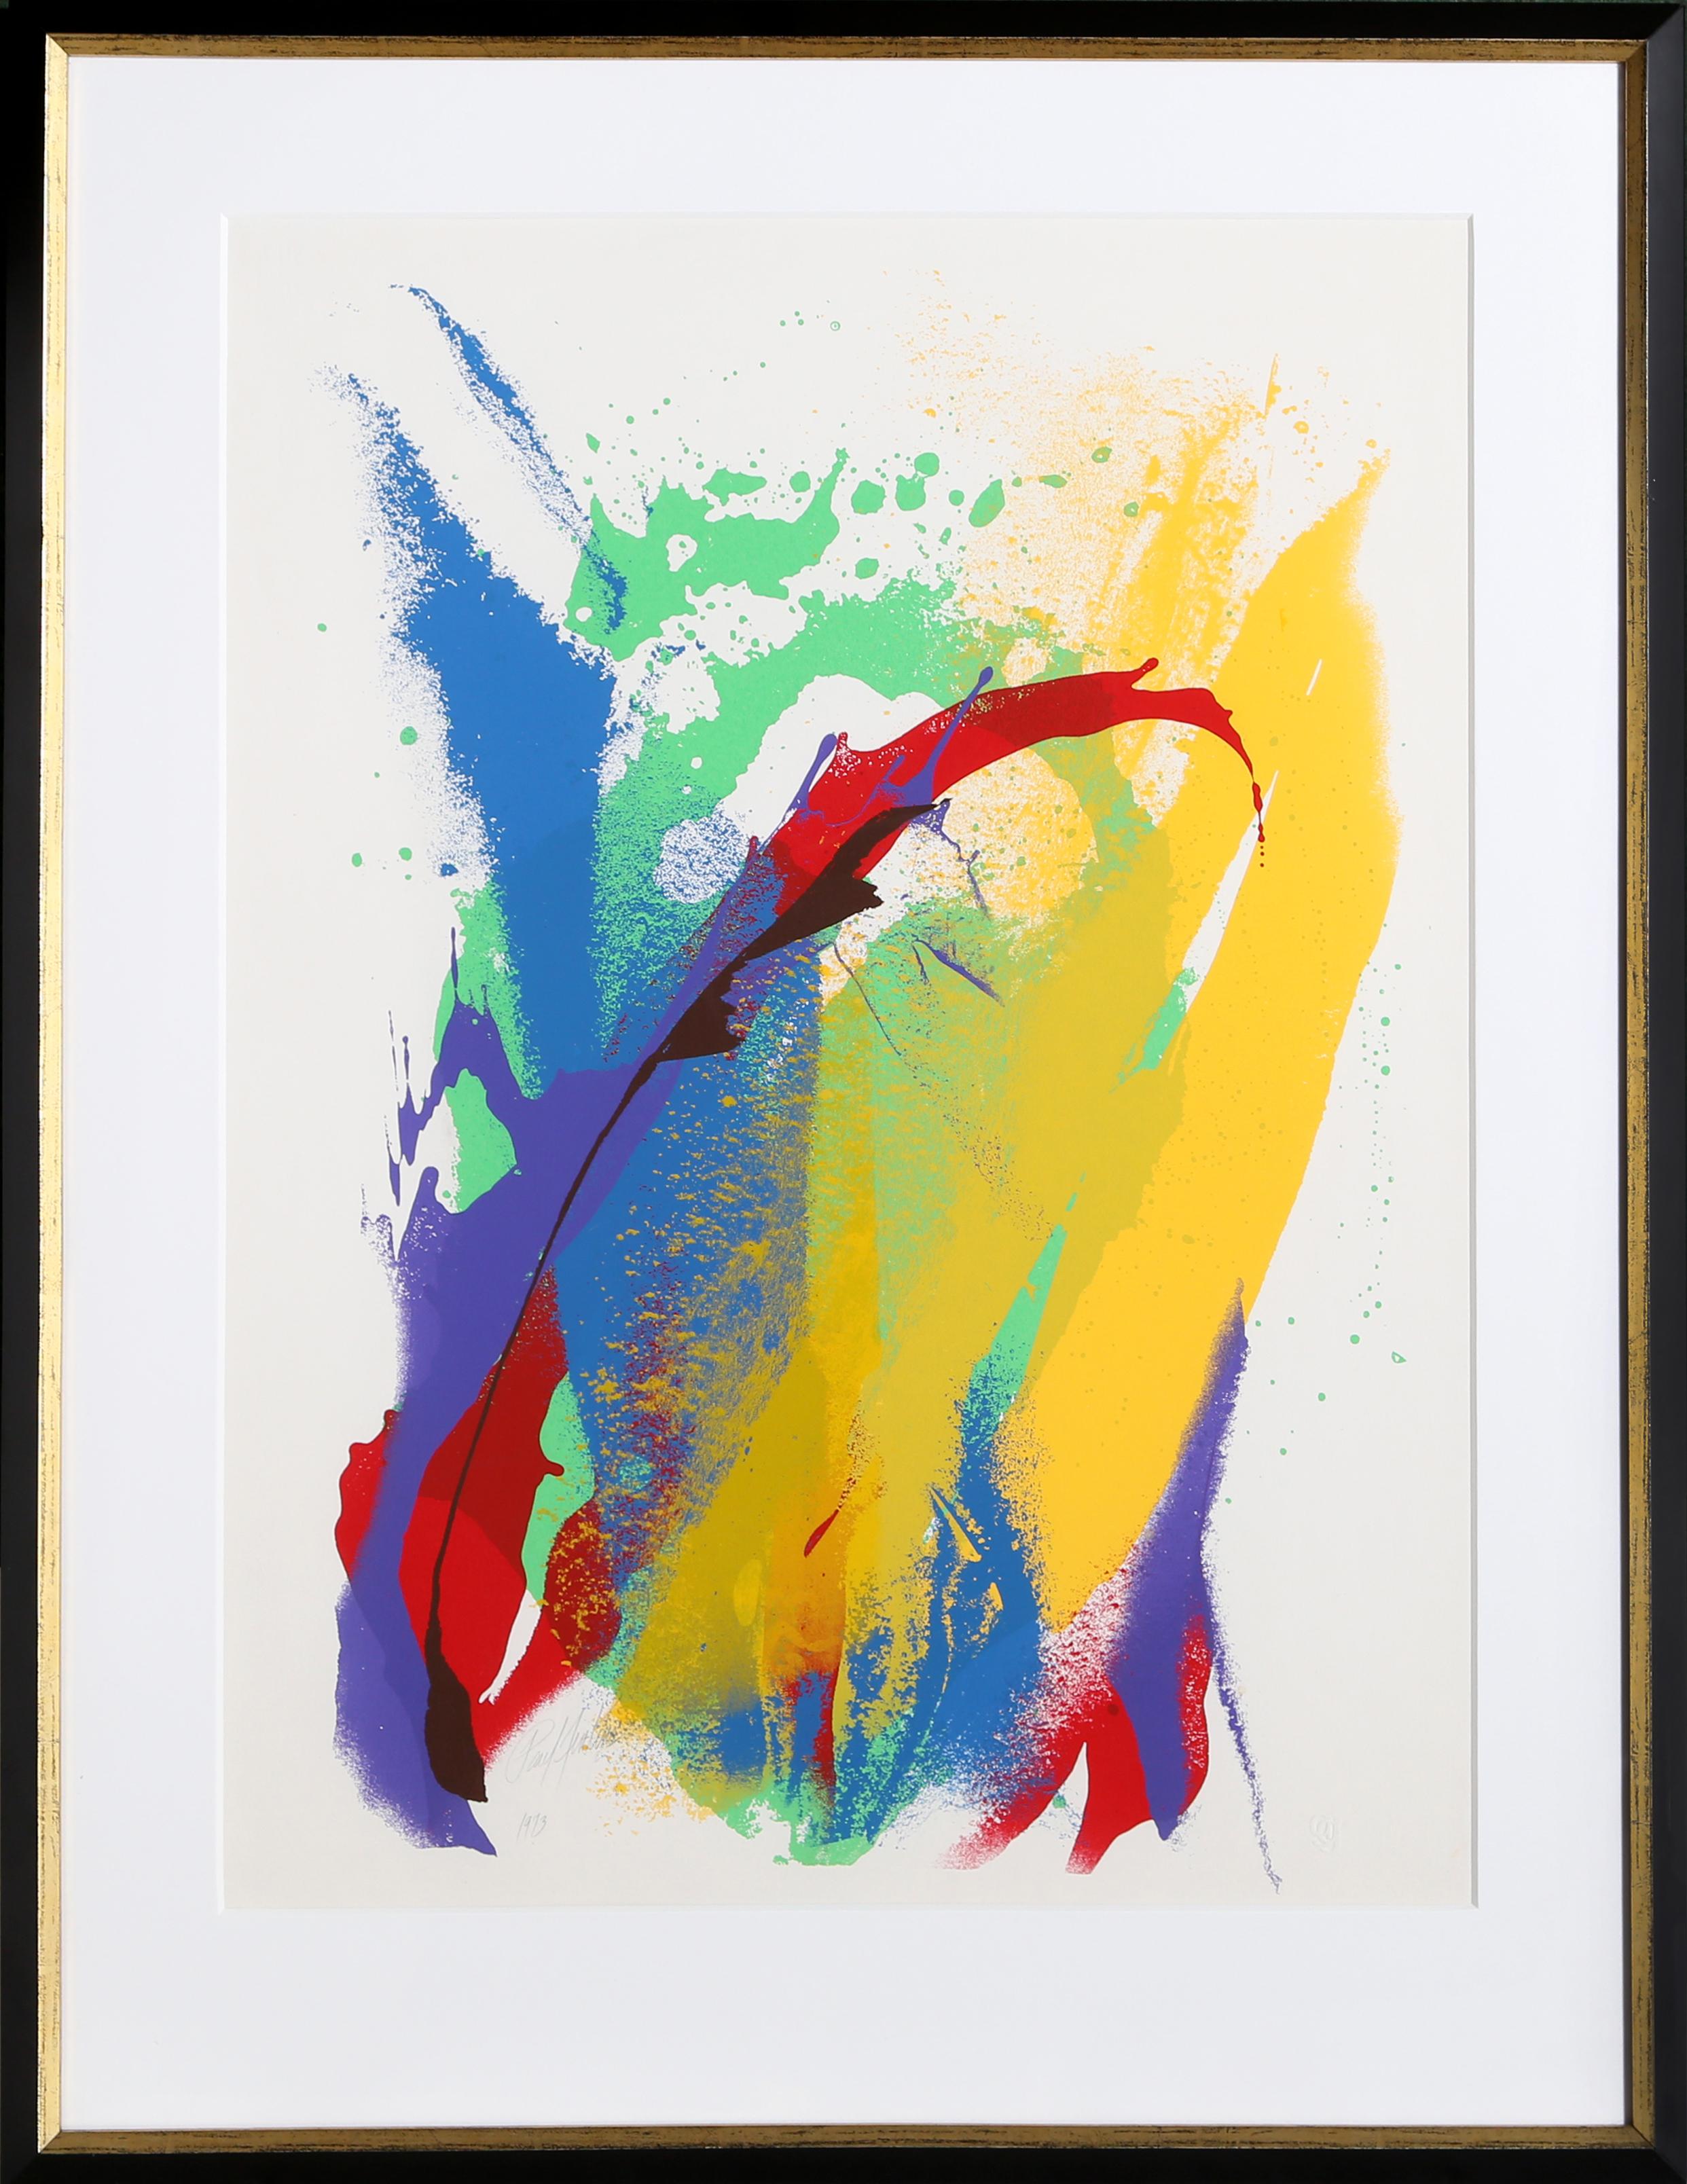 Artist: Paul Jenkins, American (1923 - 2012)
Title: Kendo
Year: 1973
Medium: Screenprint, signed, dated and numbered in pencil
Edition: 4/60
Size: 30  x 22 in. (76.2  x 55.88 cm)
Frame Size: 37.5 x 29 inches